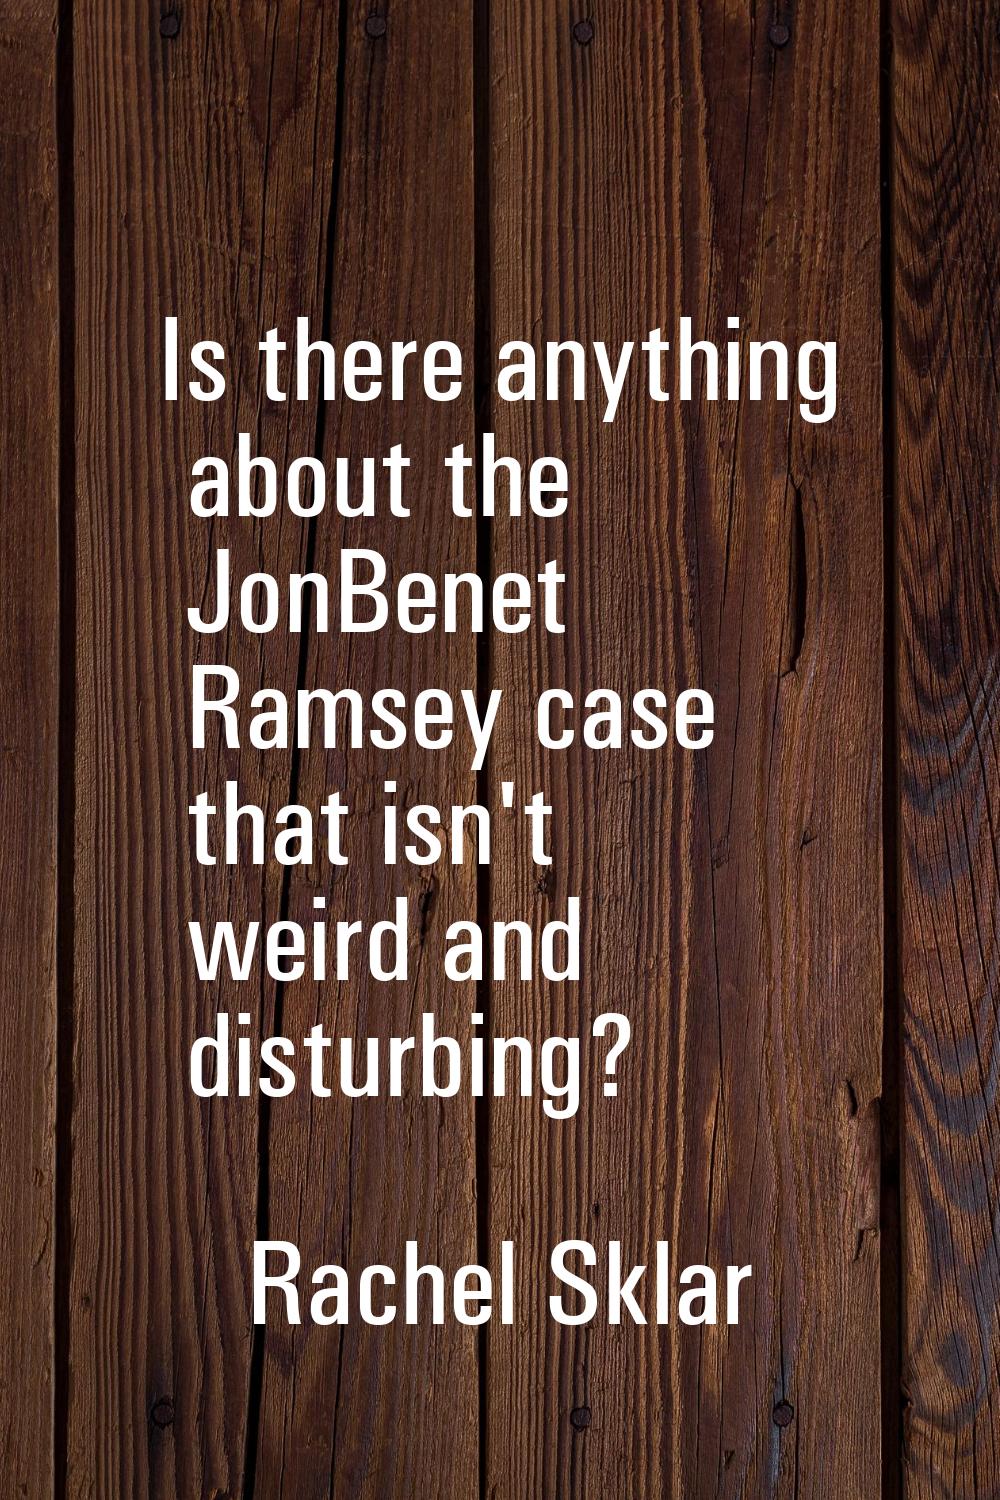 Is there anything about the JonBenet Ramsey case that isn't weird and disturbing?